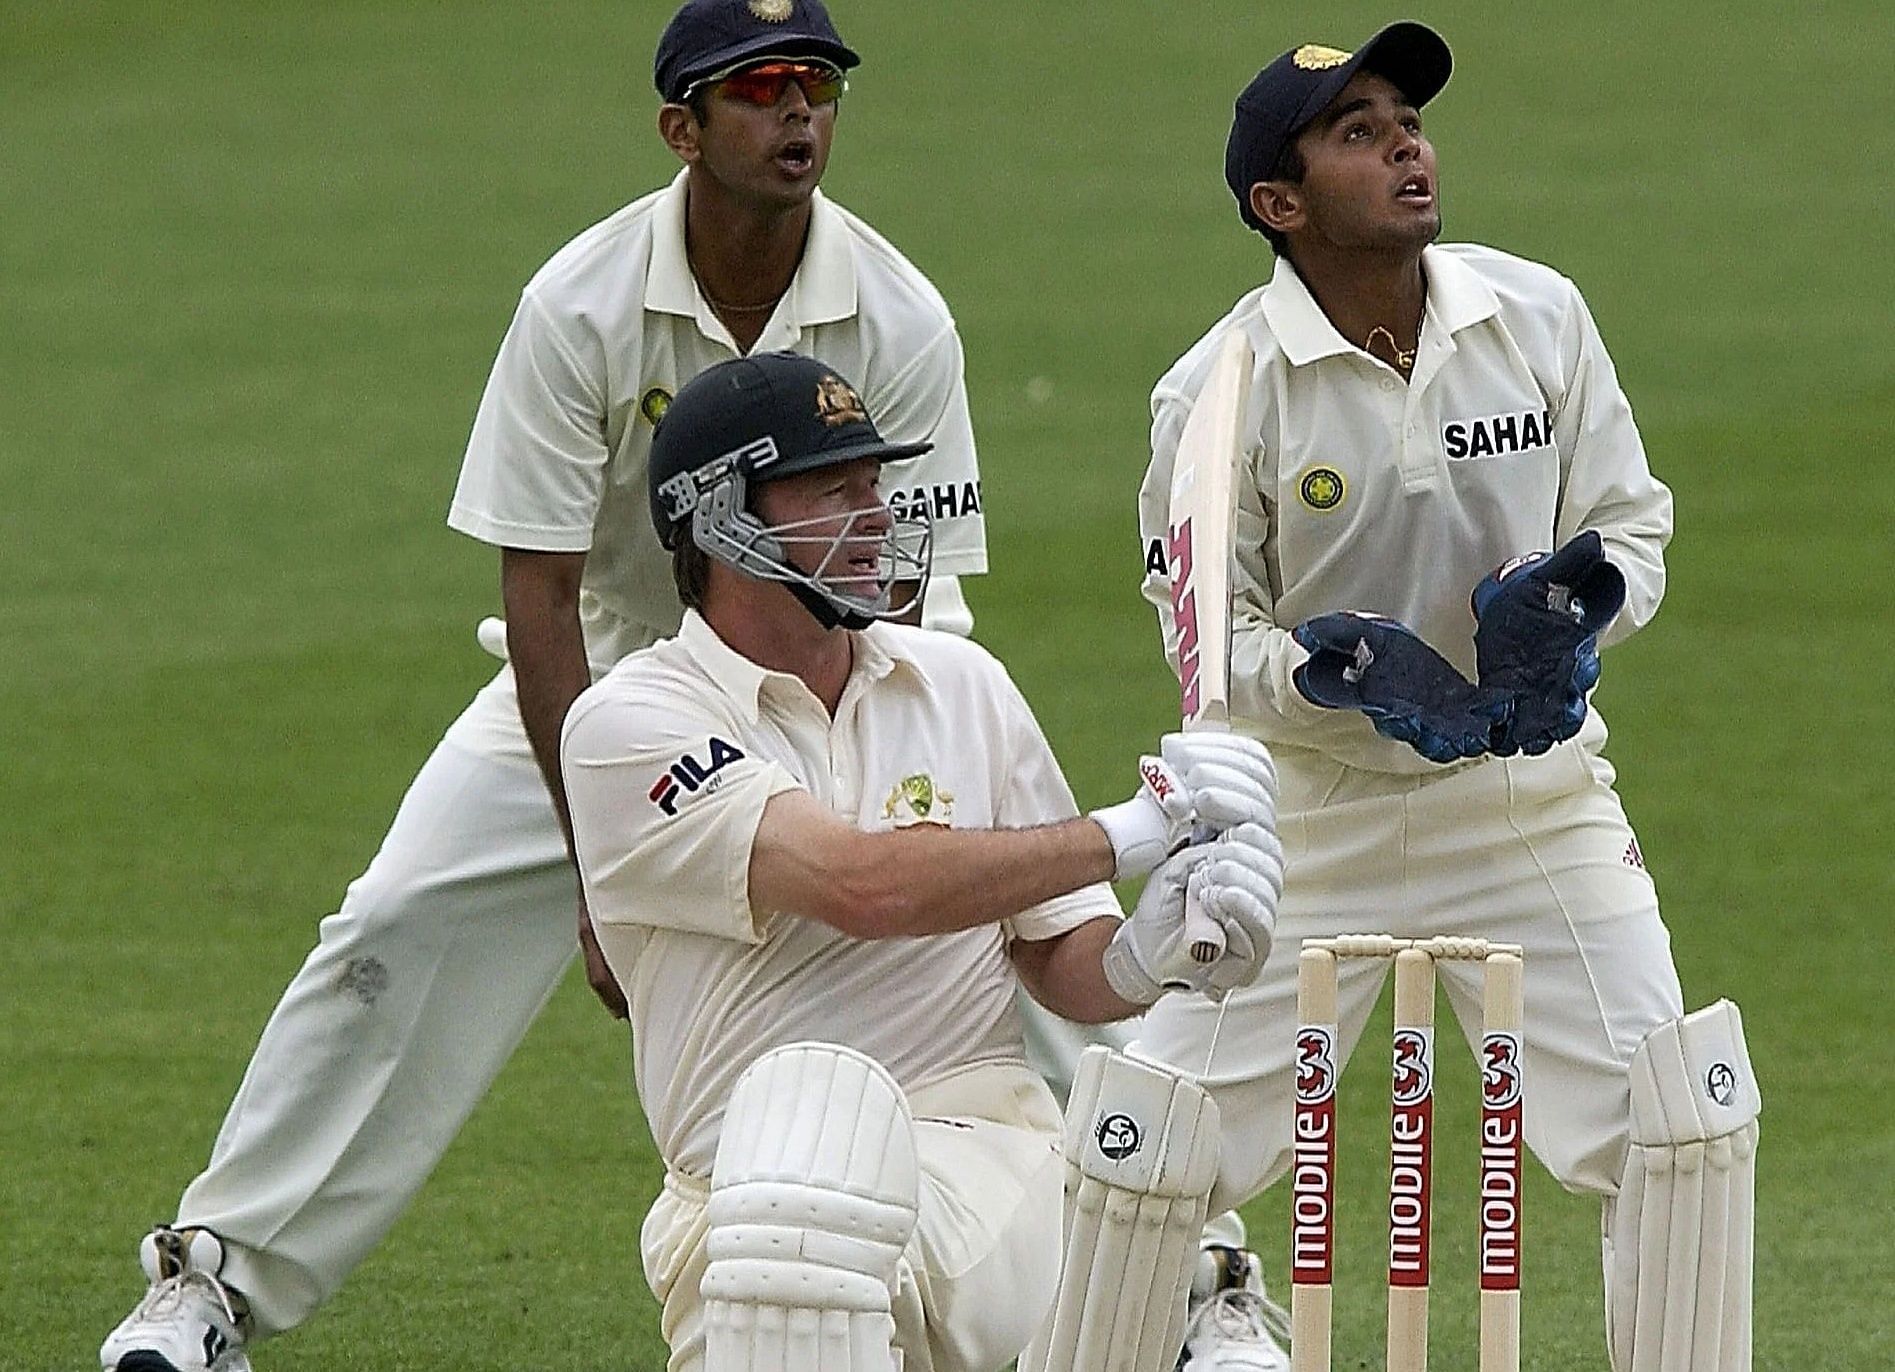 Steve Waugh batting during the 2003-04 series. Parthiv Patel is behind the stumps. Pic: Getty Images